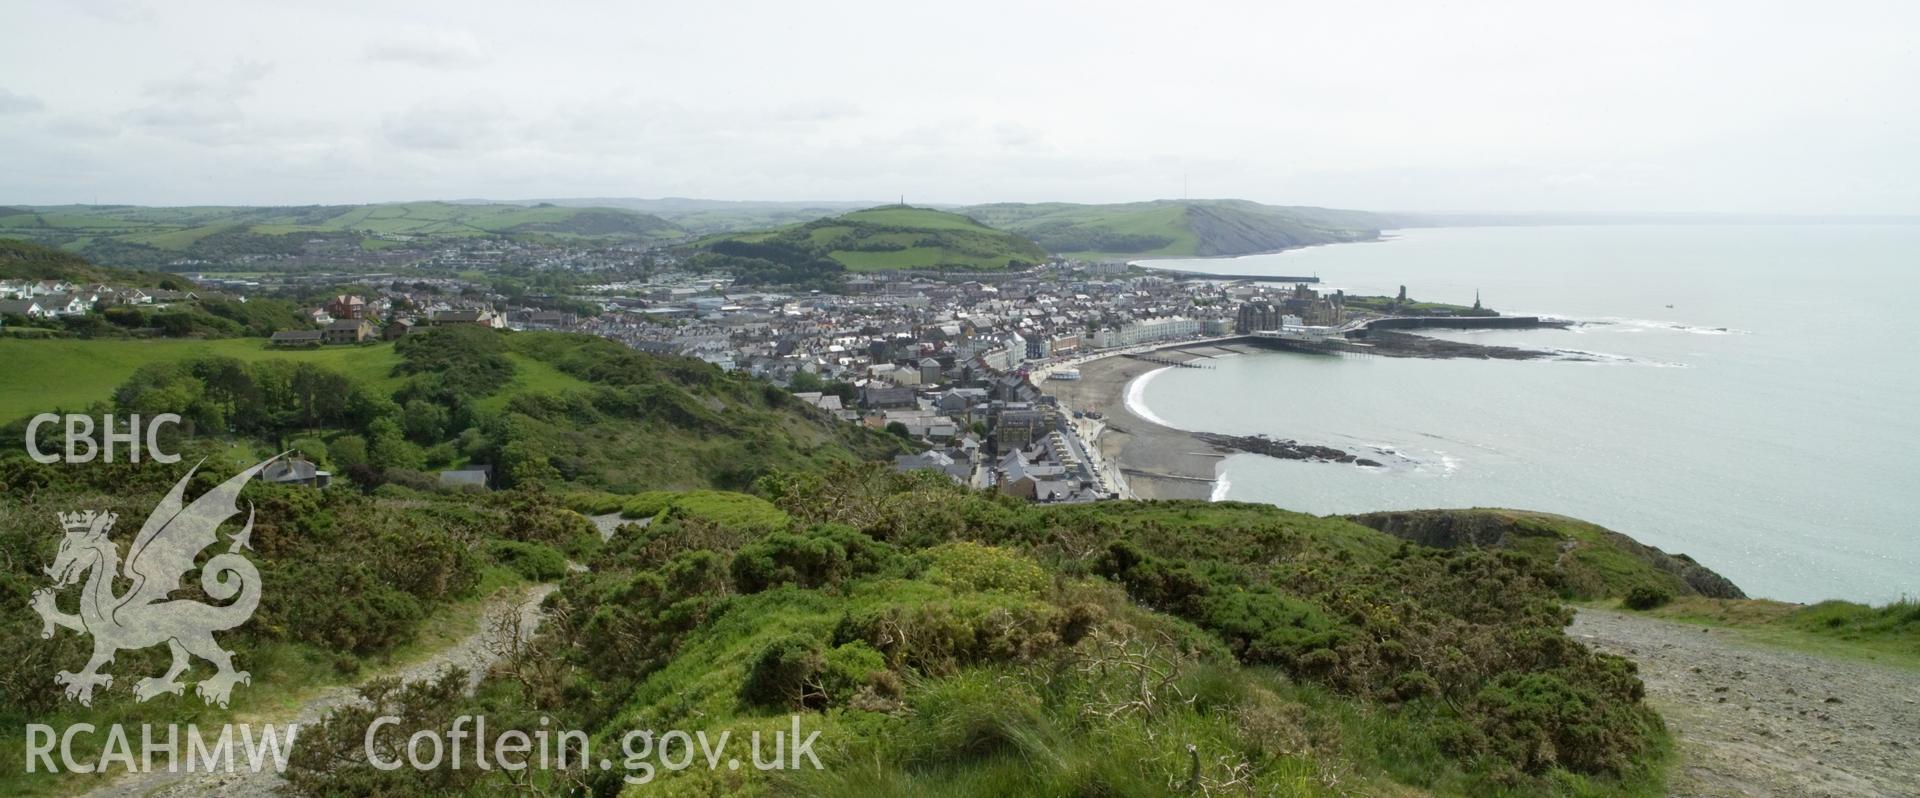 General view of Aberystwyth from the north.